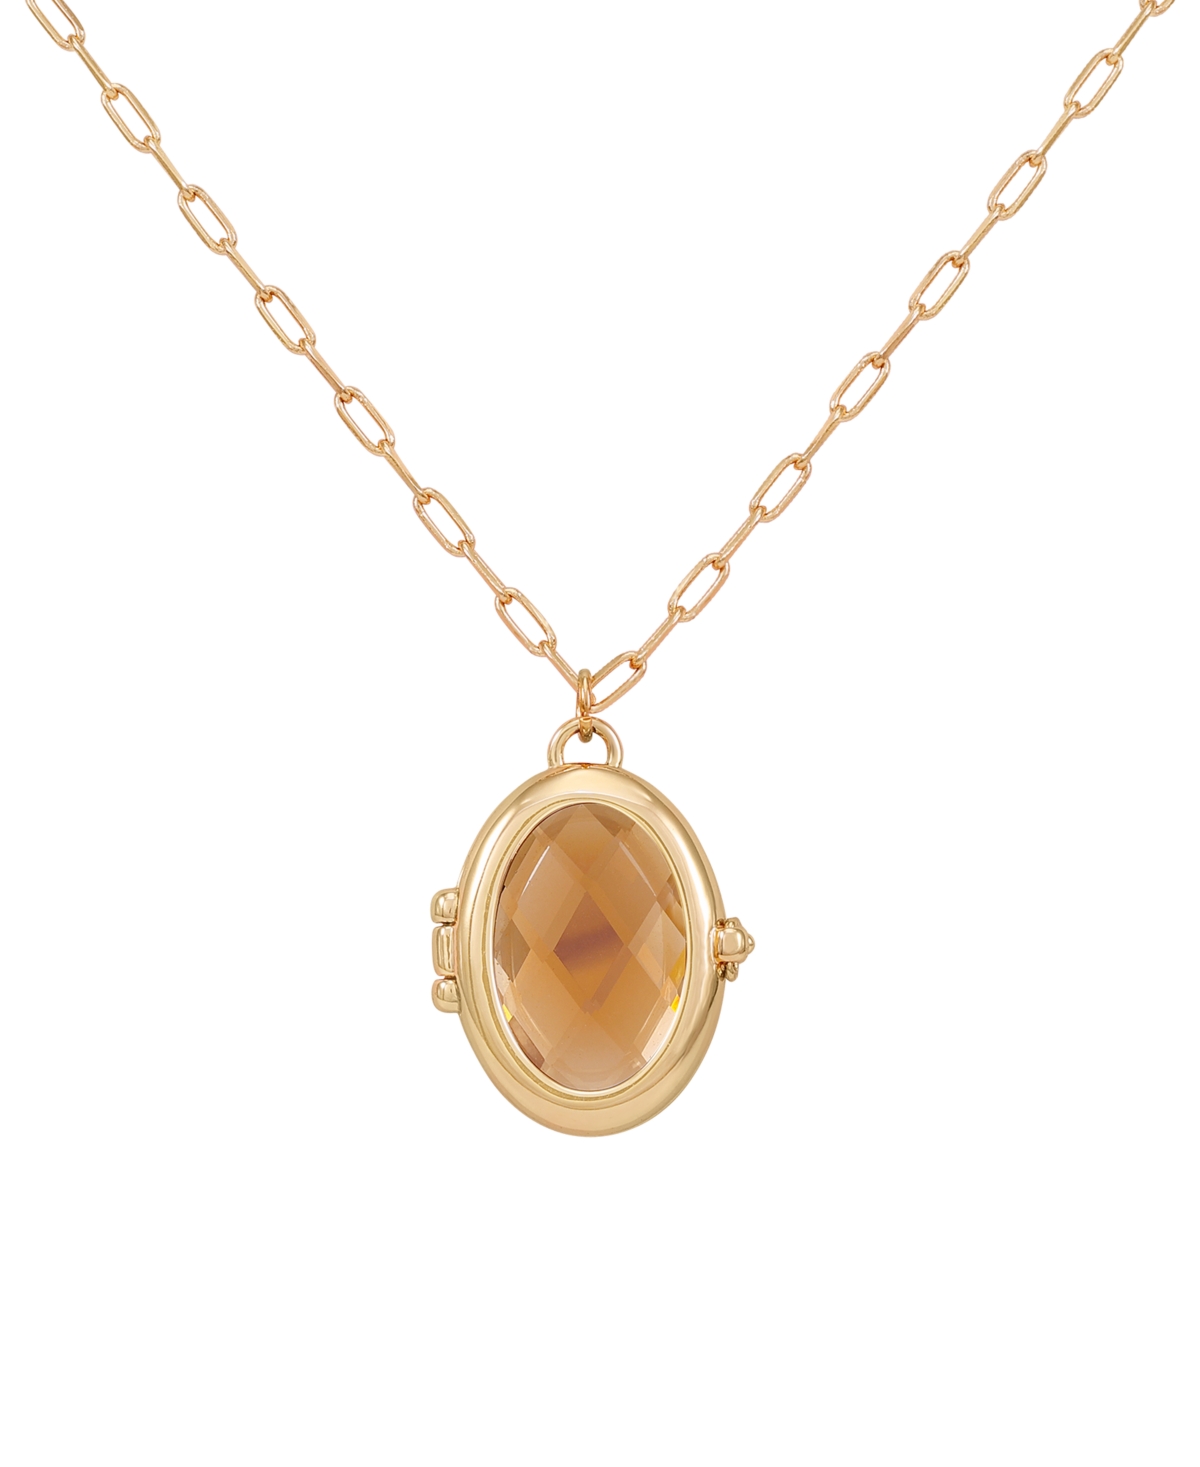 Guess Gold-tone Removable Stone Oval Locket Pendant Necklace, 18" + 3" Extender In Topaz